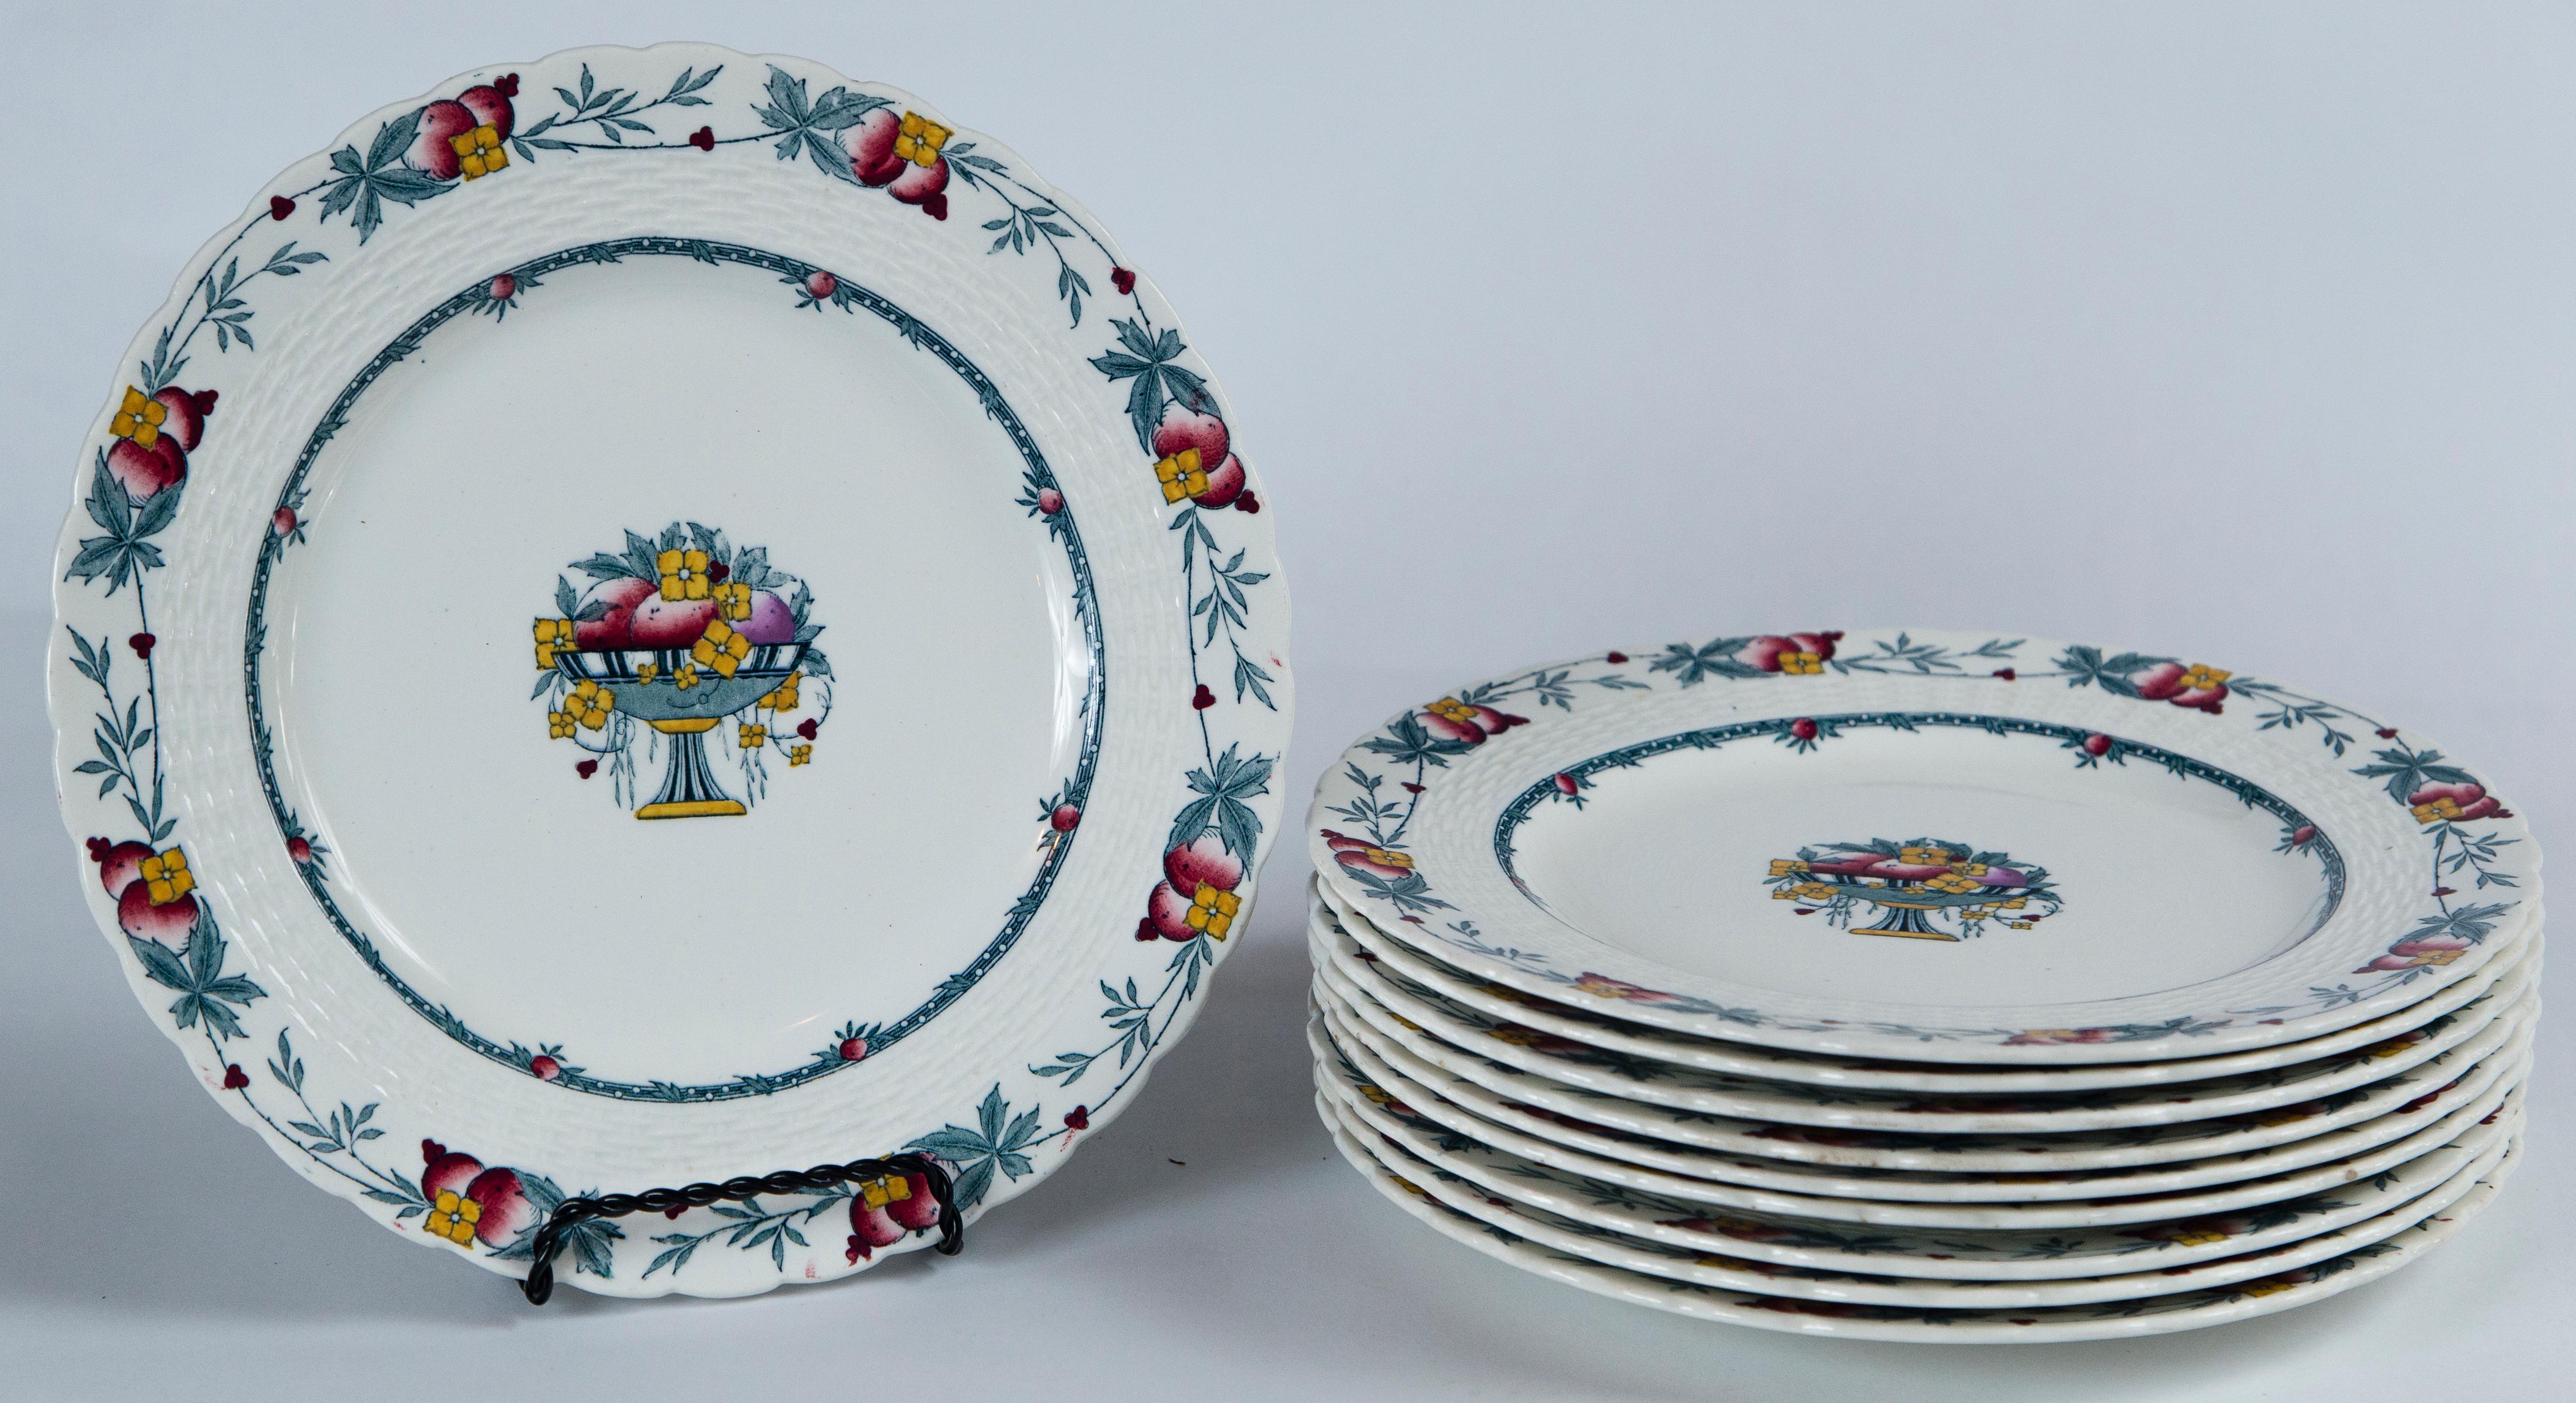 Set of 10 Minton's Stanhope plates, England, circa 1900. The Stanhope pattern features a fruit and floral border and center design with a blue and gold palette. There is a raised basket weave detail and scalloped rim. Minton's mark.

  